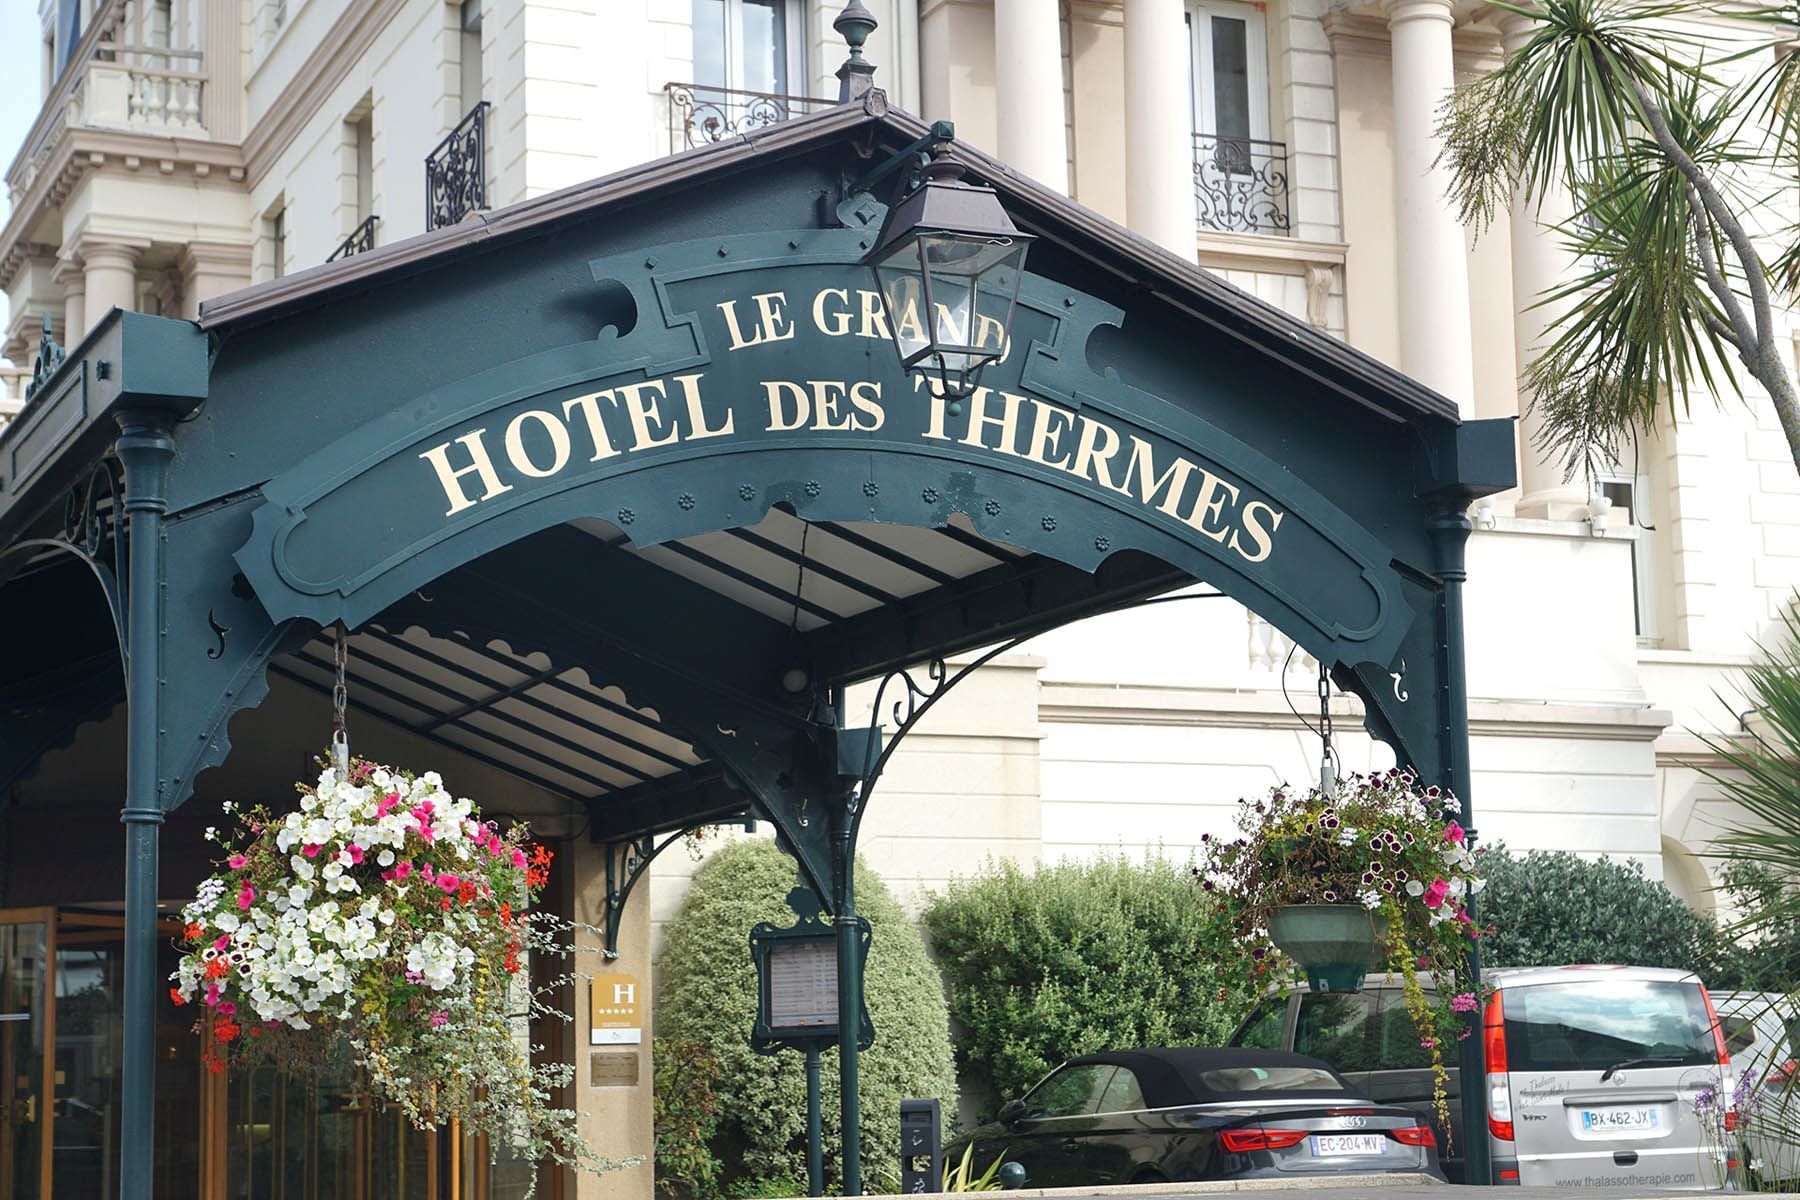 Entrance to Hotel at Grand Hotel des Thermes